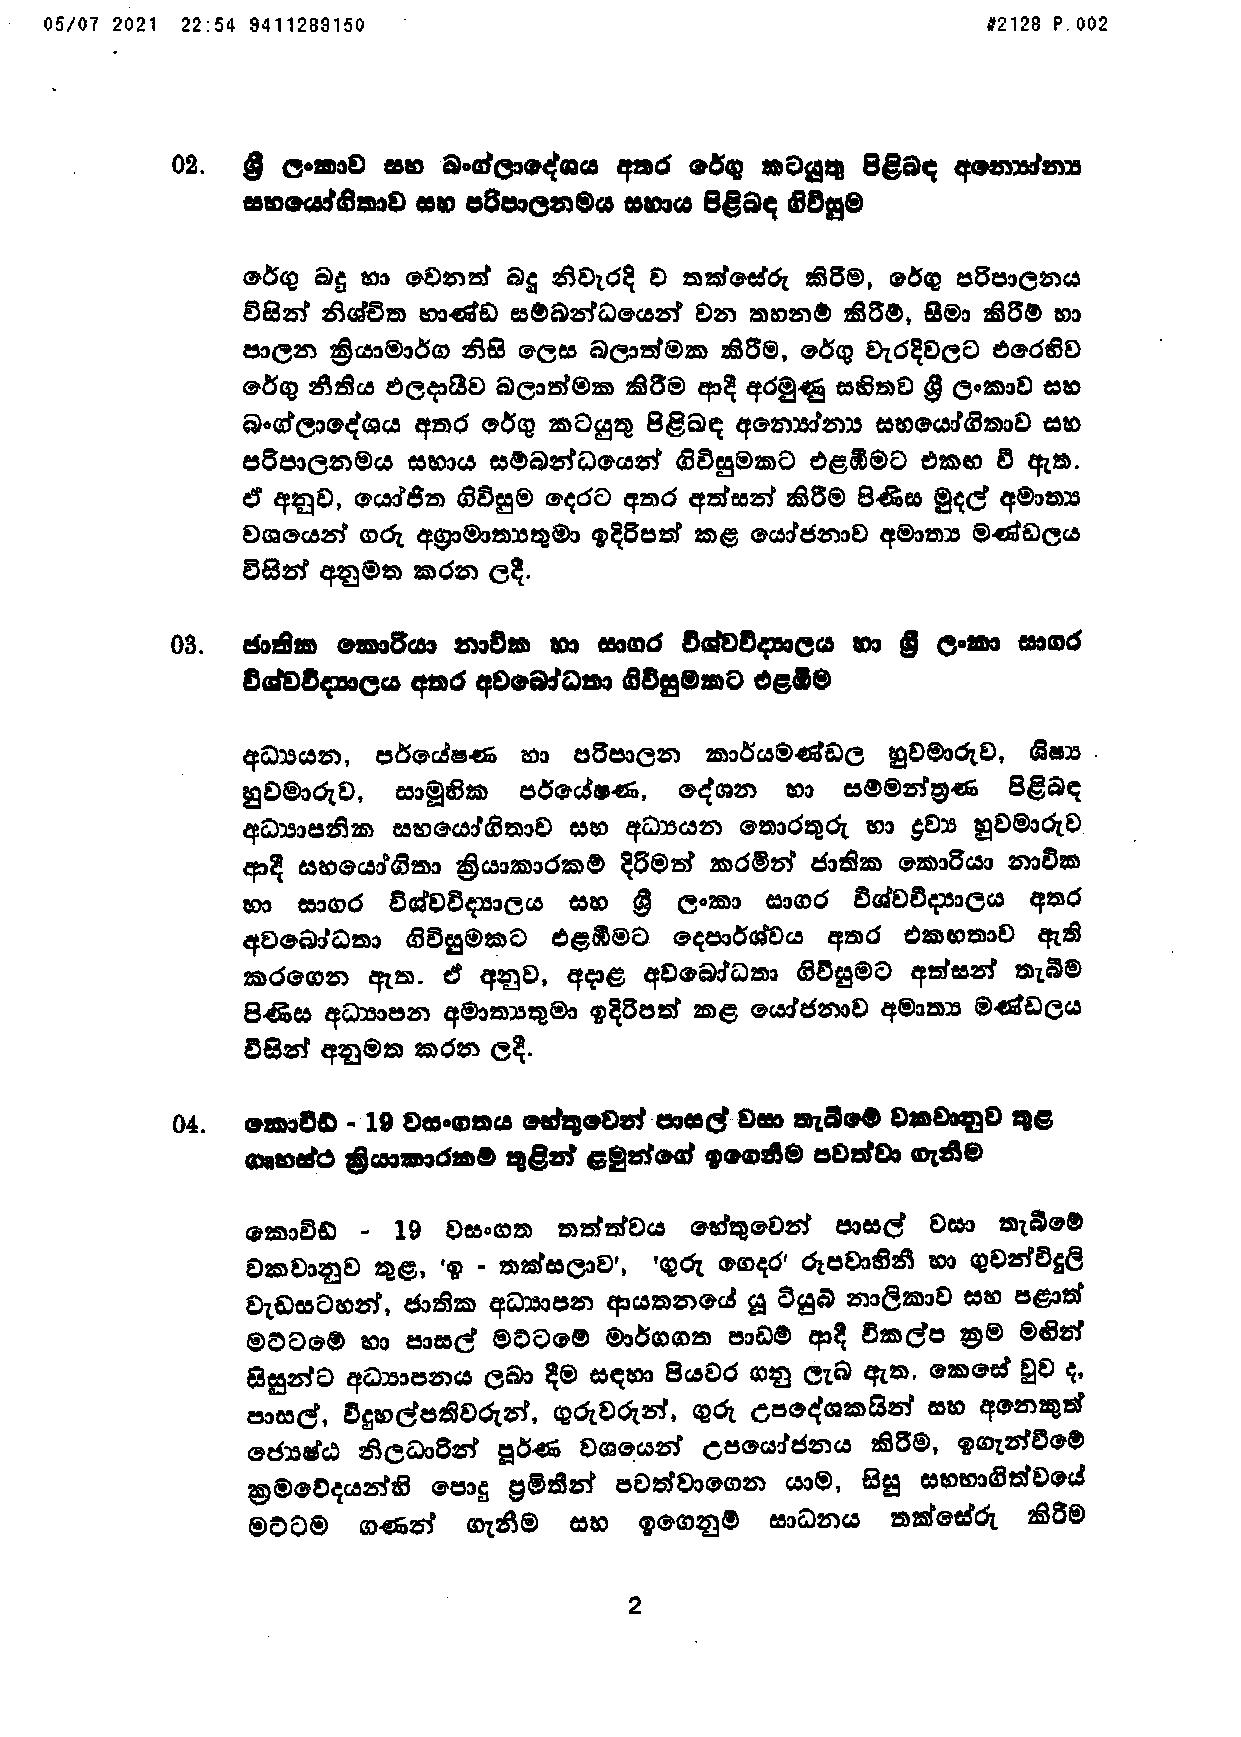 Cabinet Decision on 05.07.2021 page 002